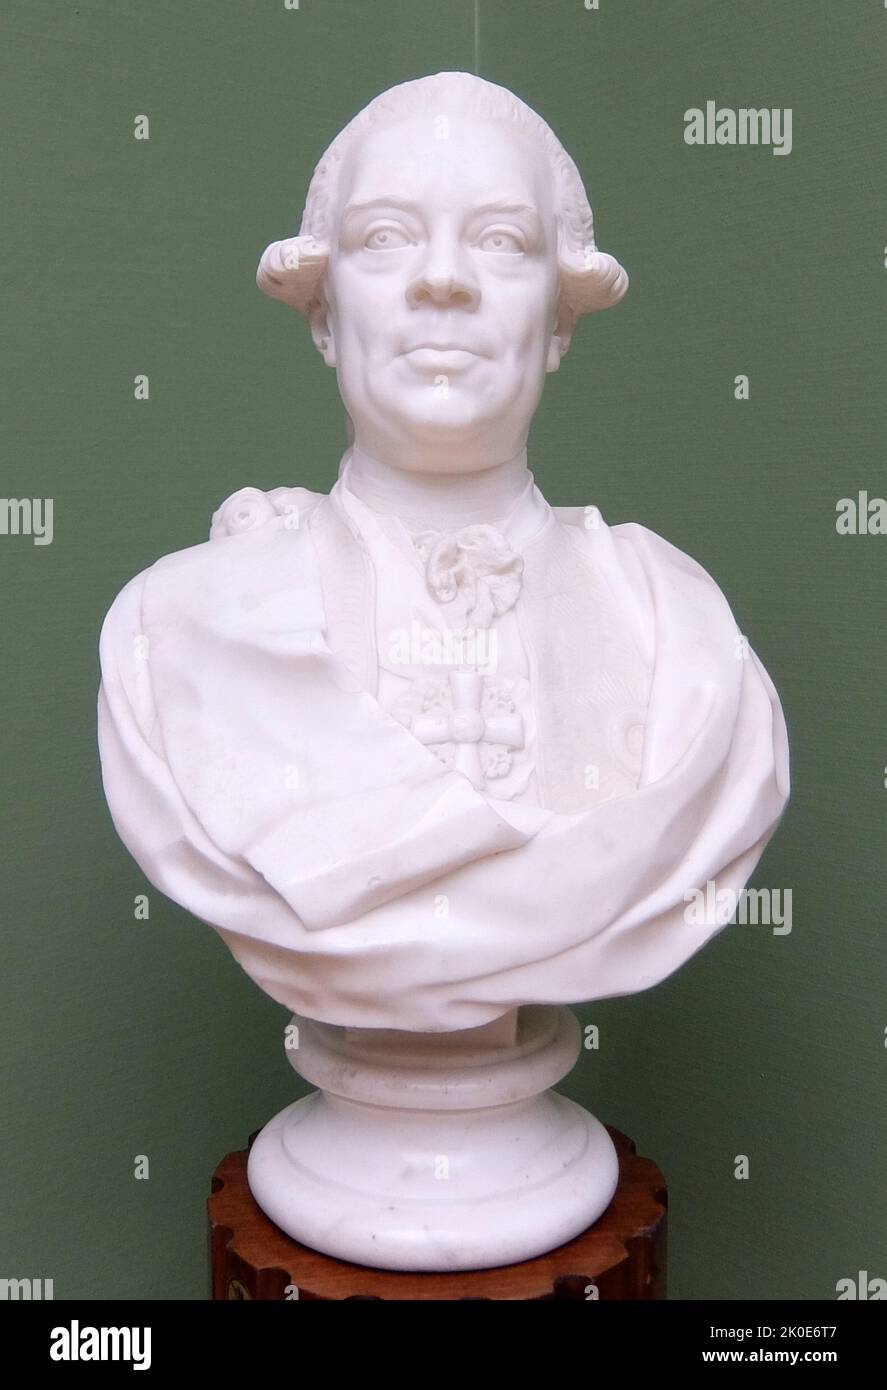 Count Ivan Grigoryevich Chernyshyov (1726 - 1797; Russian General and Admiral, prominent during the reign of Empress Catherine the Great. Bust in marble, 1770, by Fedot Ivanovich Shubin (May 28, 1740 - May 24, 1805) is widely regarded as the greatest sculptor of 18th-century. Stock Photo